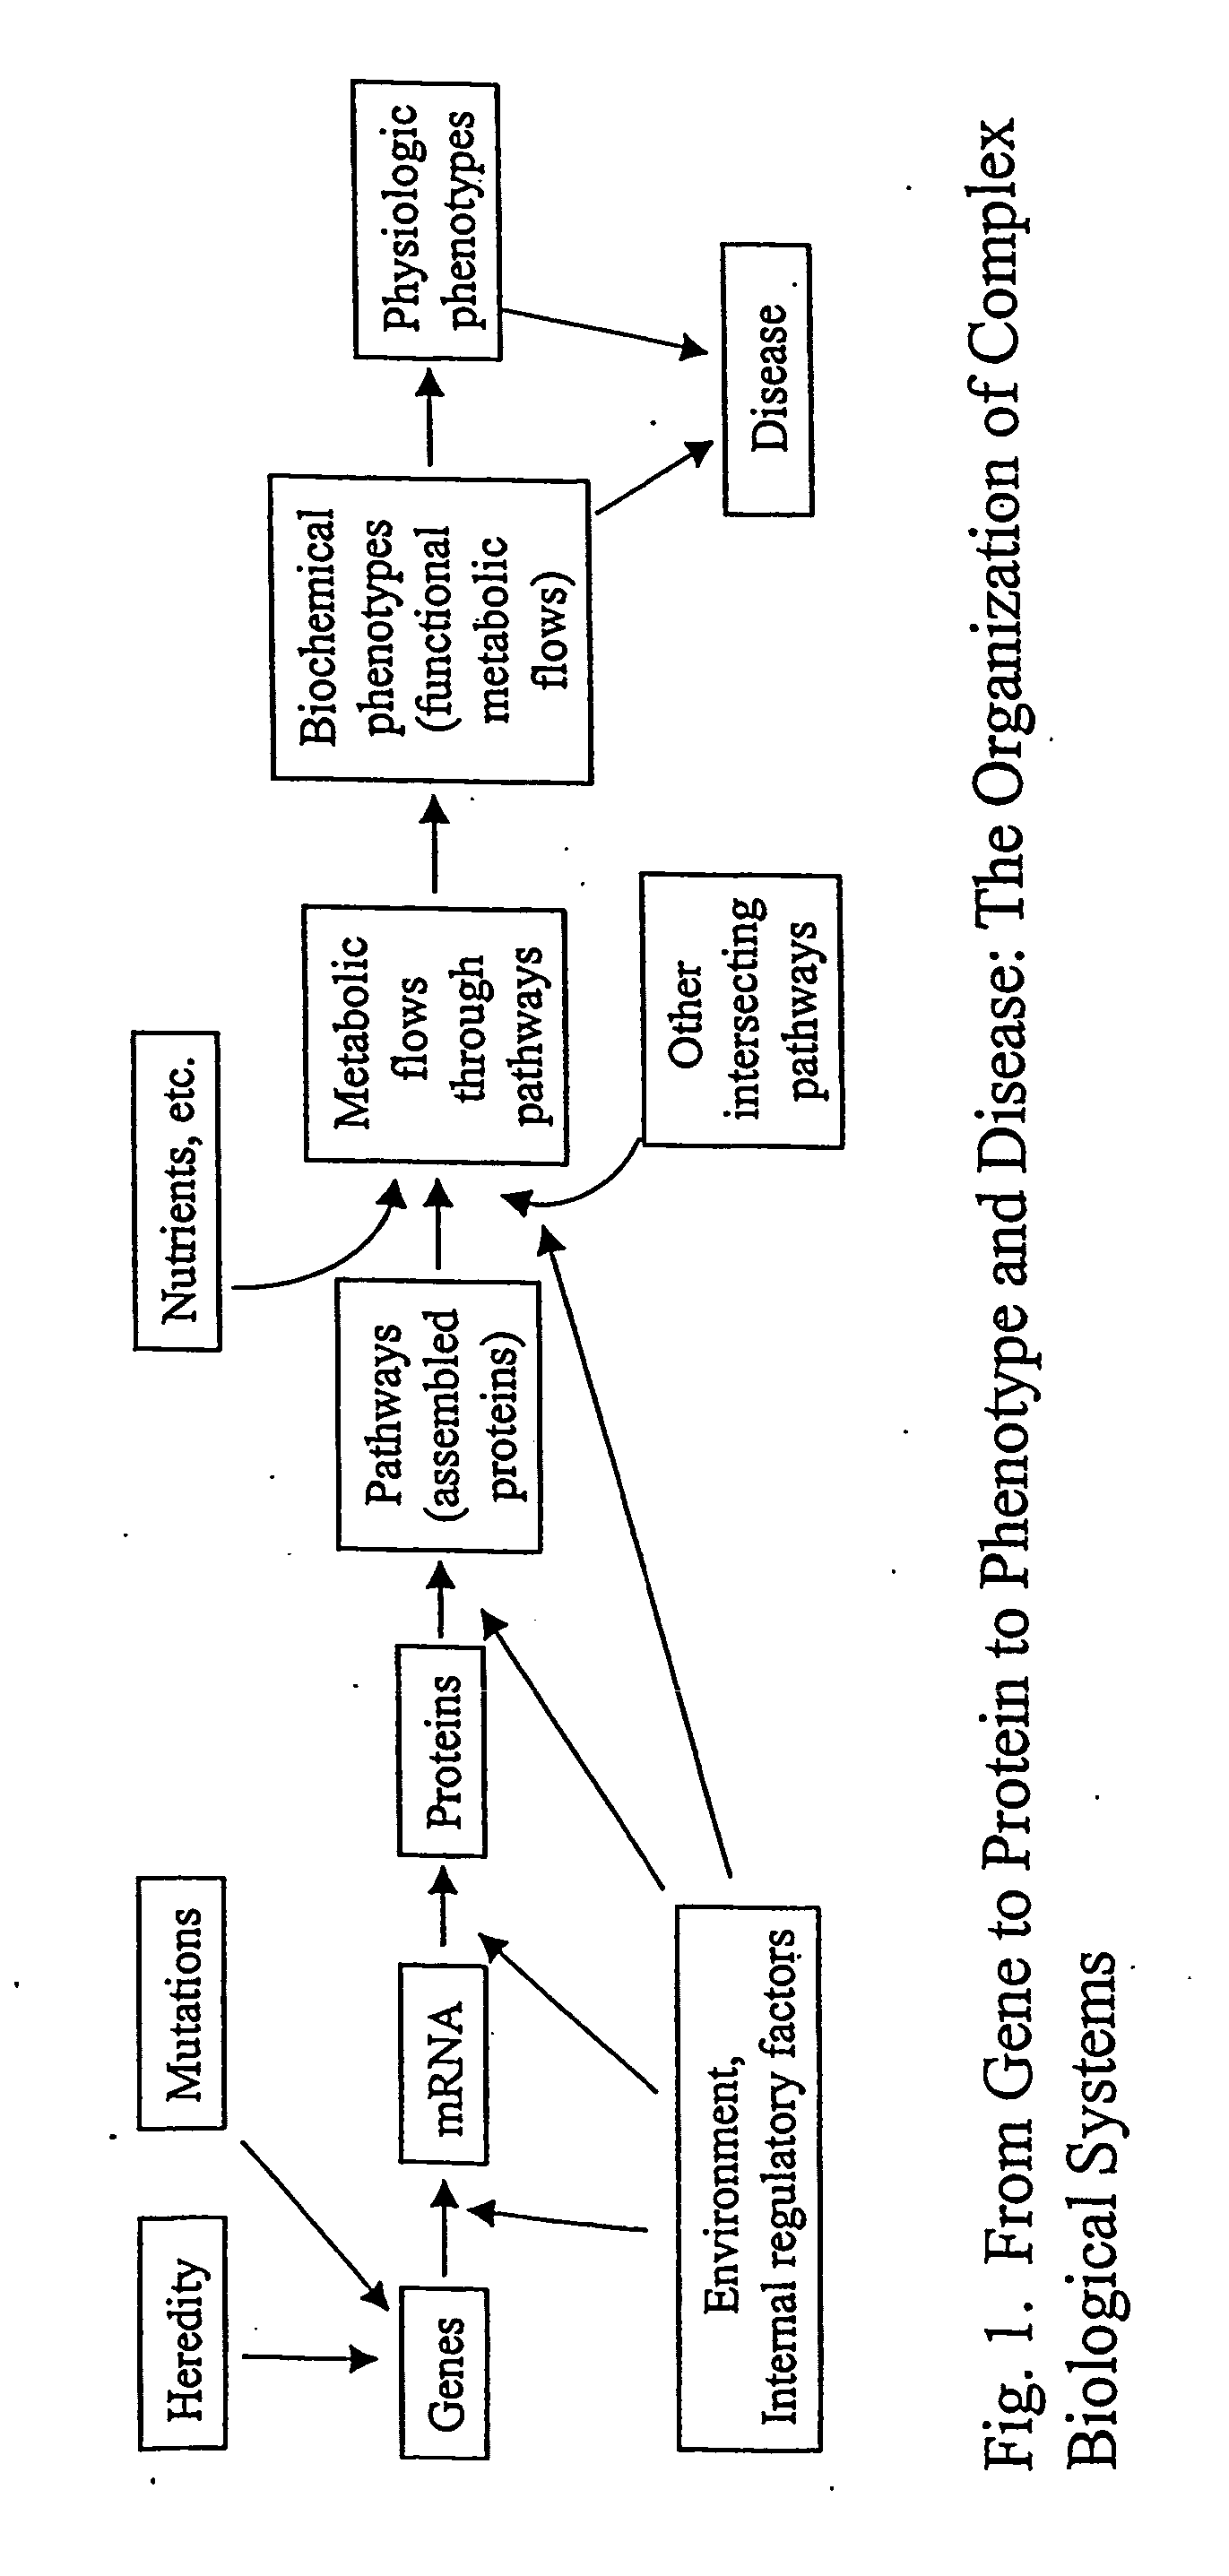 Method for automated, large-scale measurement of the molecular flux rates of the proteome or the organeome using mass spectrometry